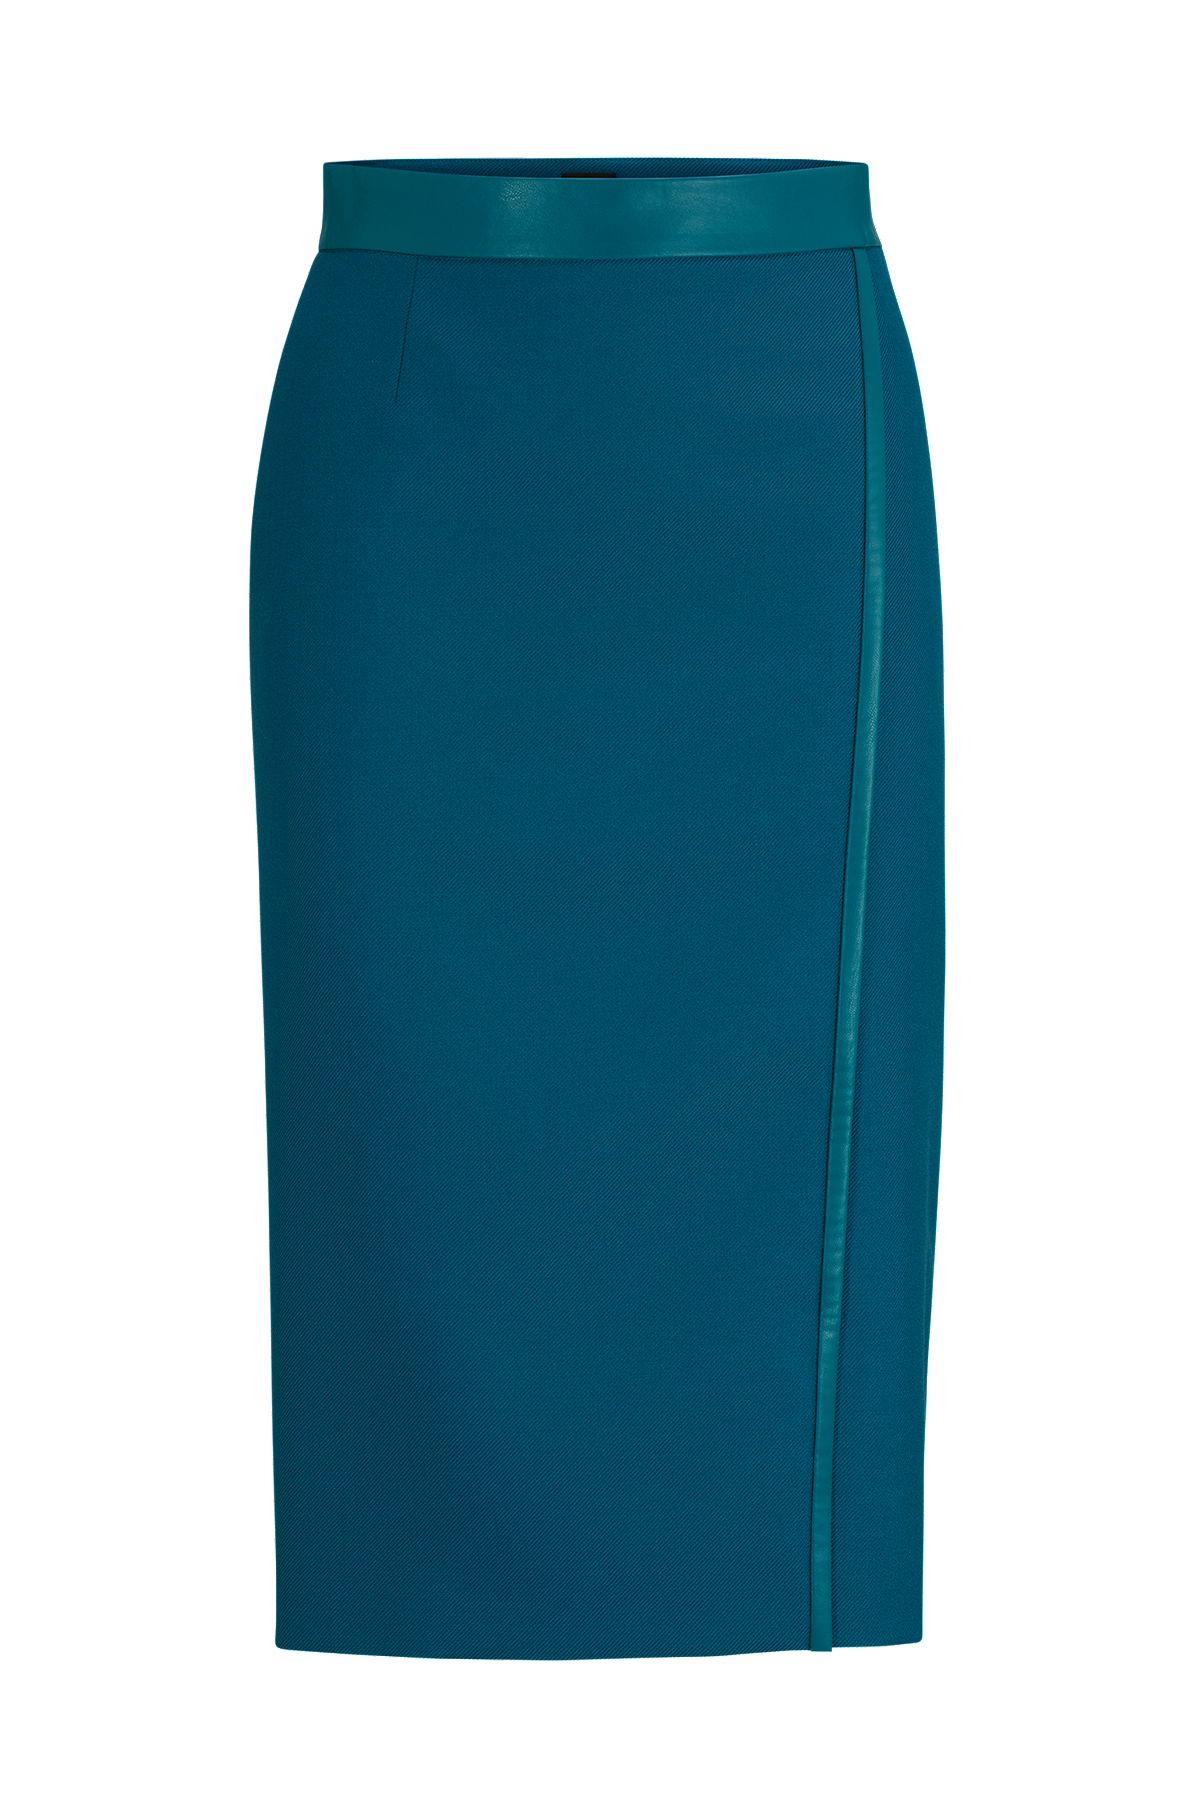 Pencil skirt in wool twill with faux-leather trims, Green